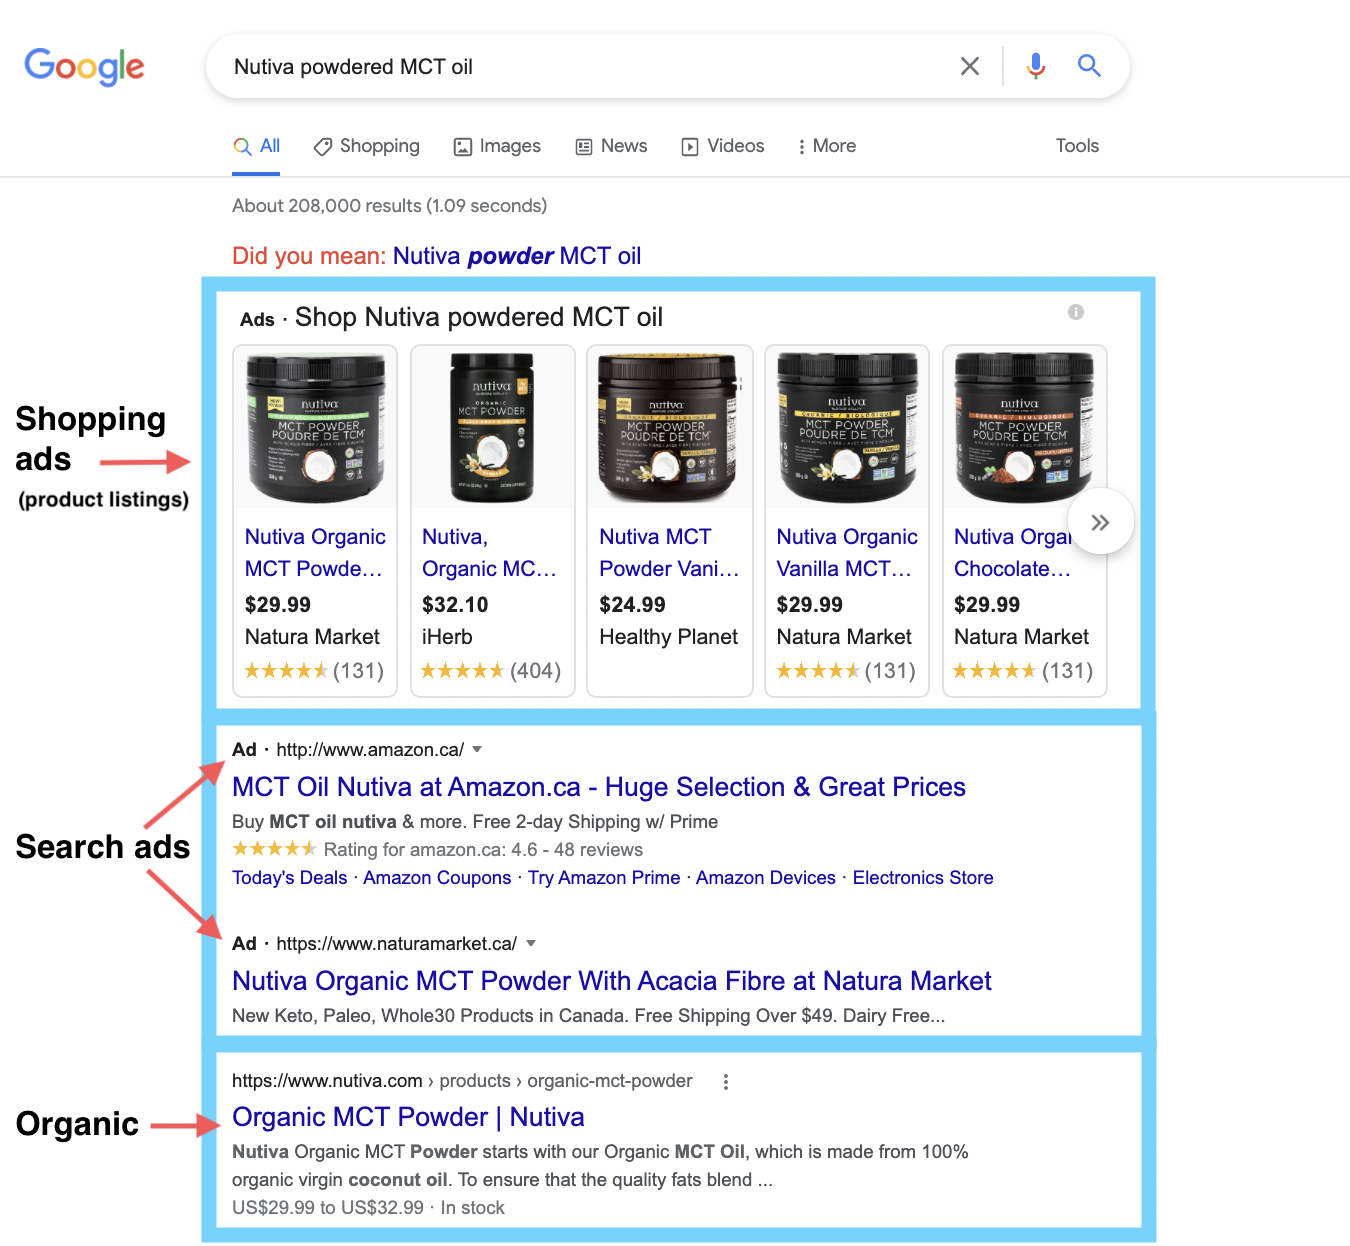 Image-based shopping ads and text-based search ads in Google SERP